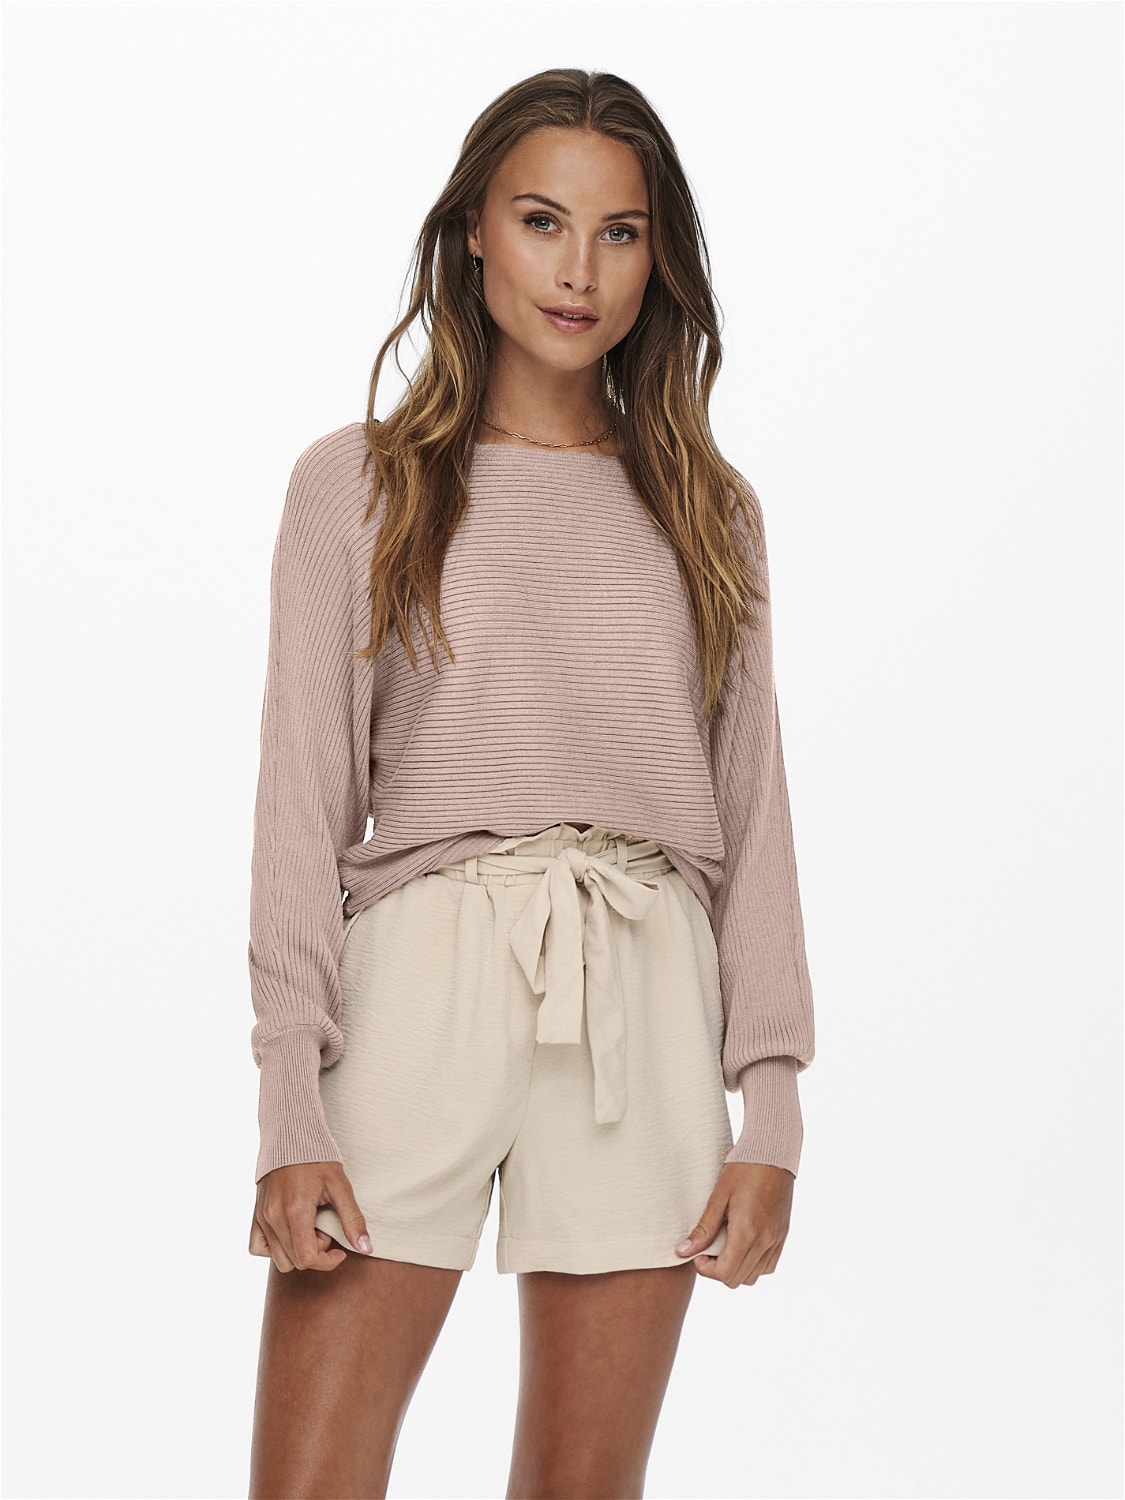 ONLY Boat neck High cuffs Pullover -Misty Rose - 15226298